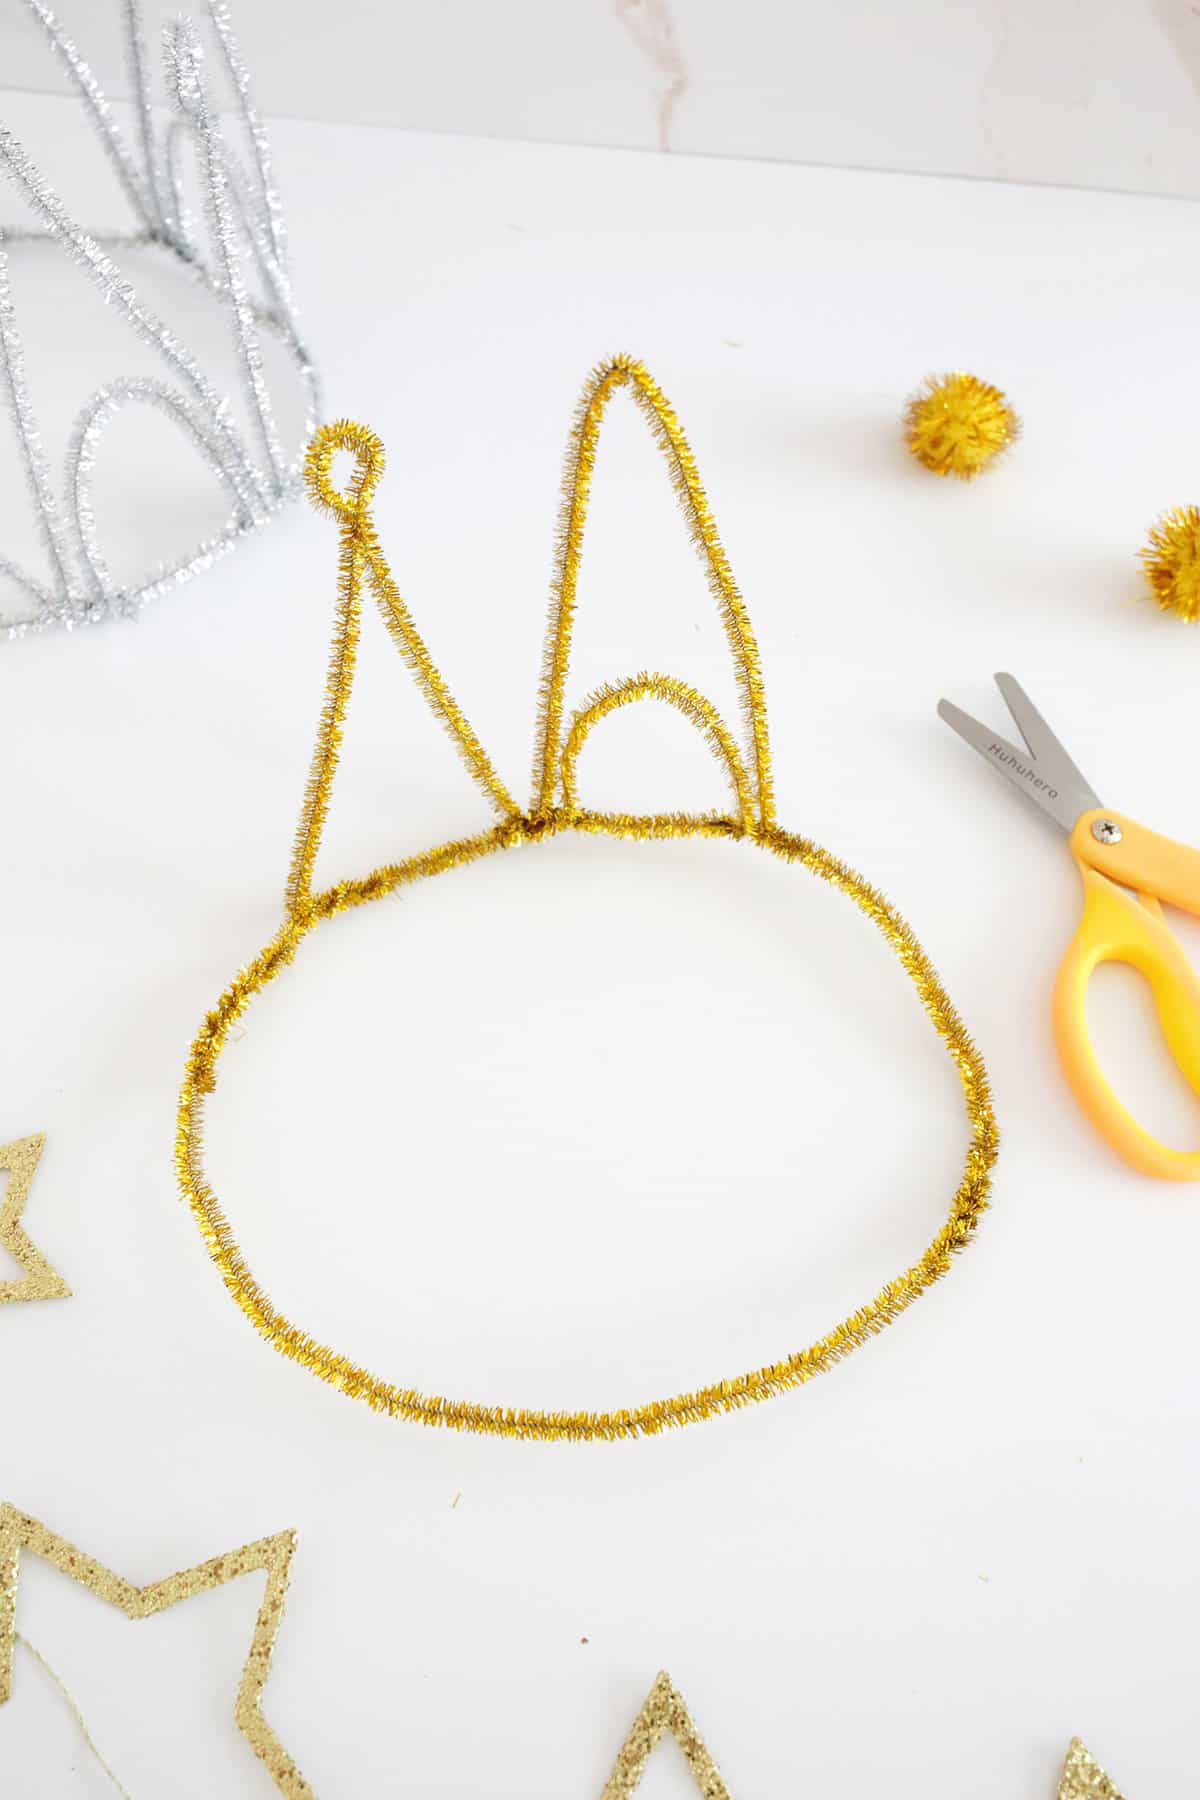 pipe cleaner crown with a few sections